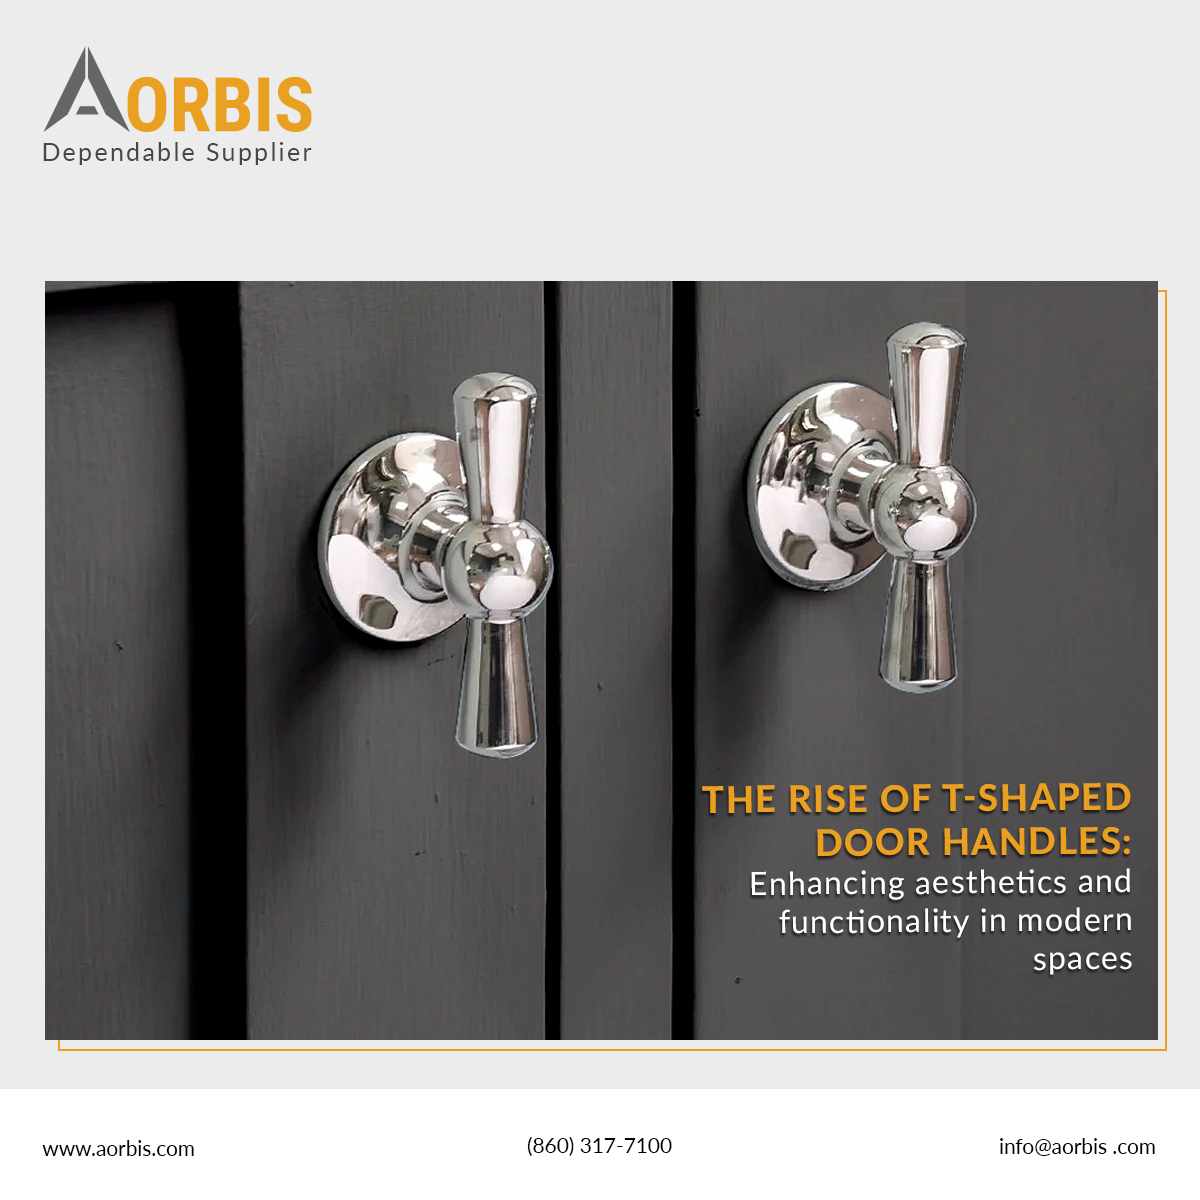 💫Move over knobs and levers! T-shaped handles are the new stars of modern design. They're sleek, adding a contemporary touch, and incredibly functional. The T-shape provides a comfortable grip for effortless door opening.
#TshapedHandles #ModernInteriors 
rb.gy/n7y6ye